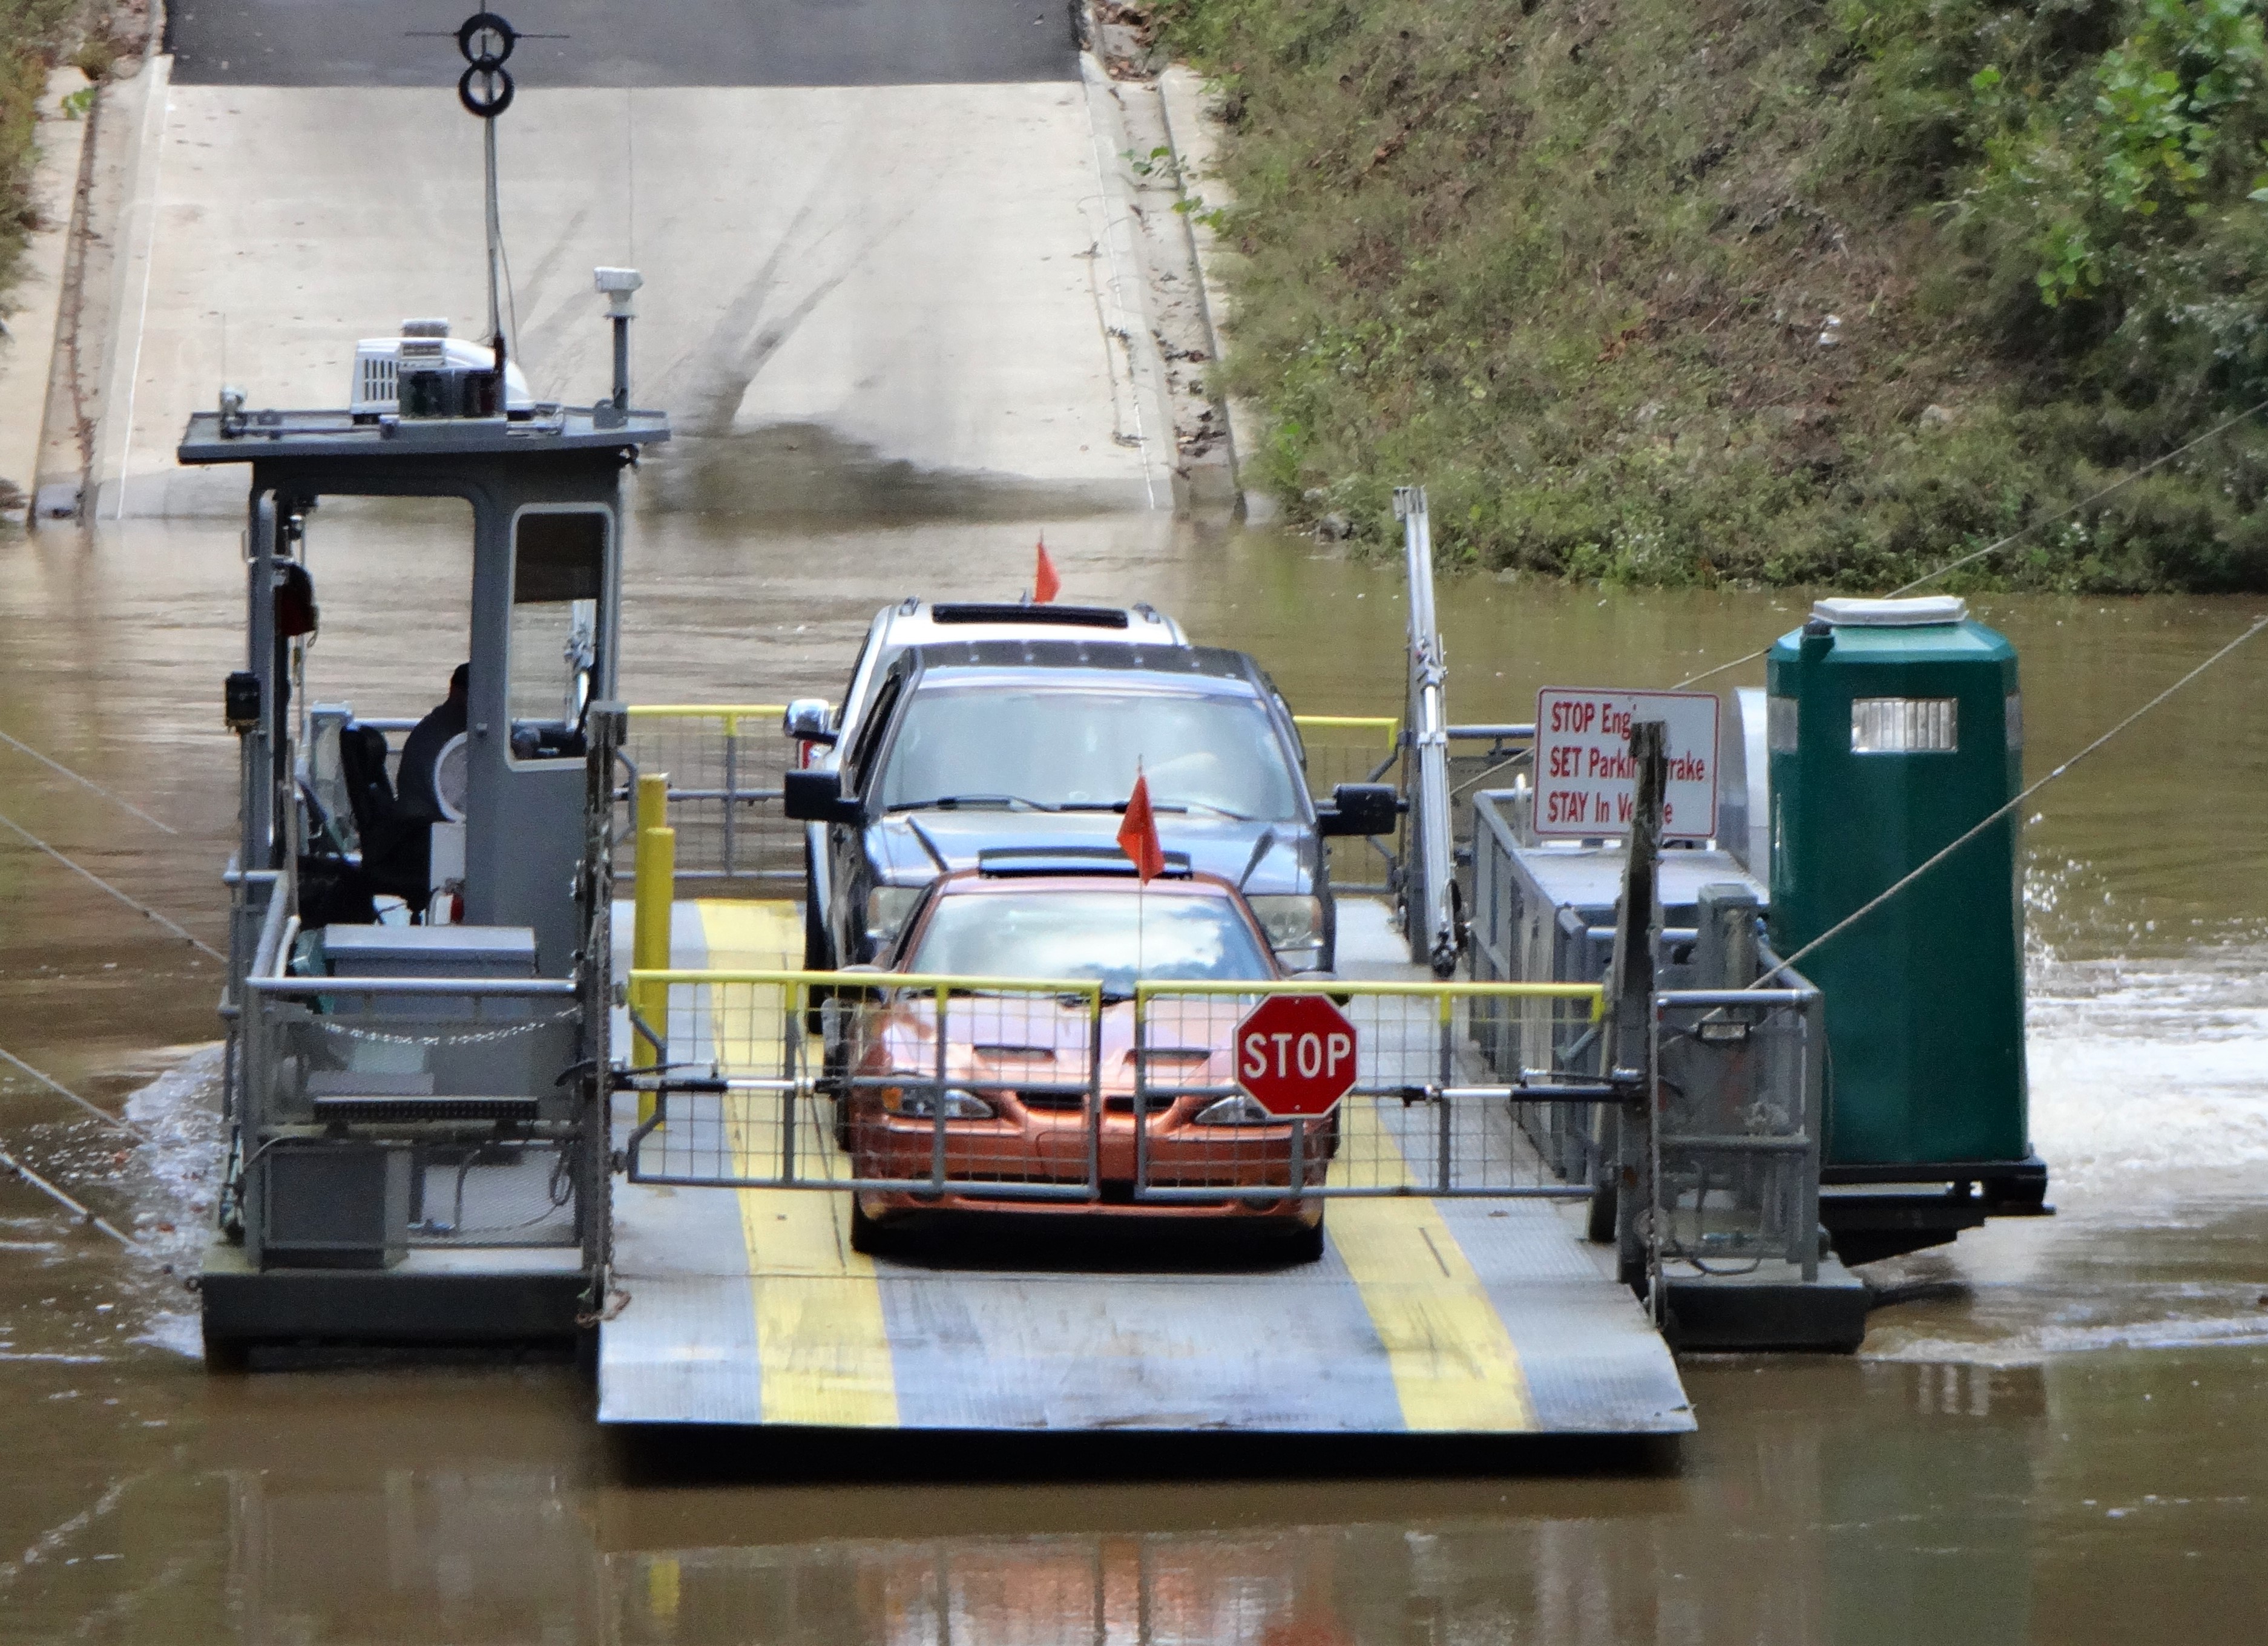 Green River ferryboat ferrying vehicles across the Green River